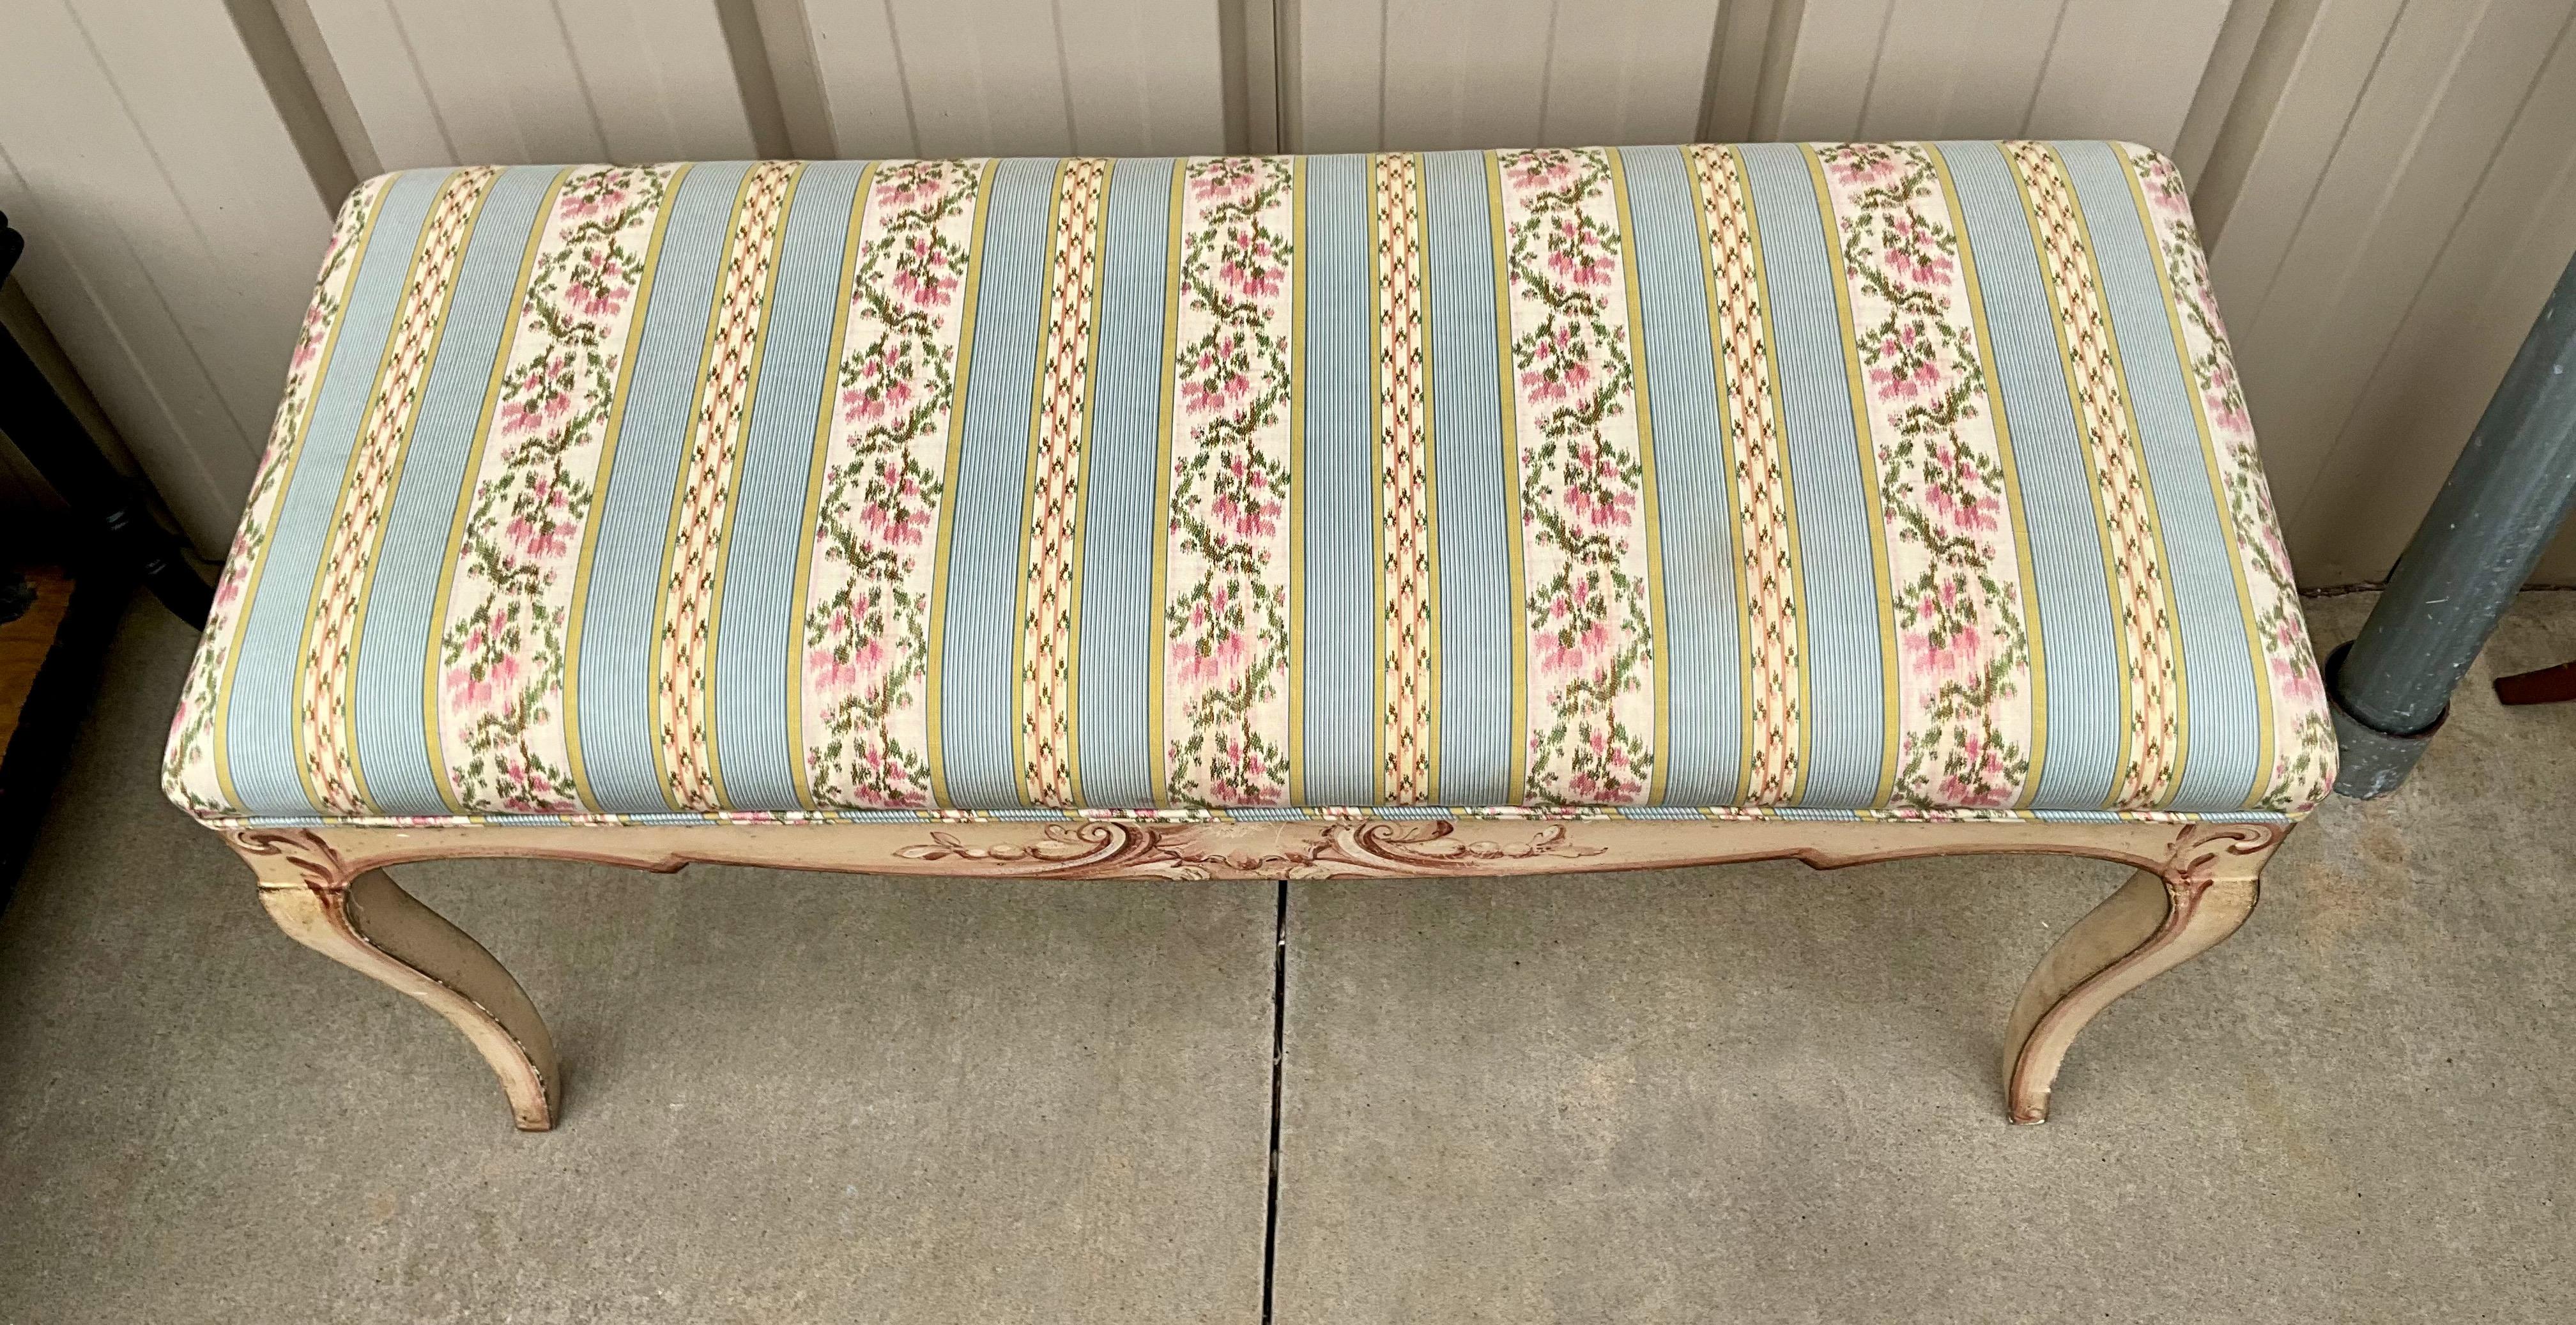 Rococo 1960s Carved And Painted Italian Bench / Ottoman In Striped Floral Chintz  For Sale